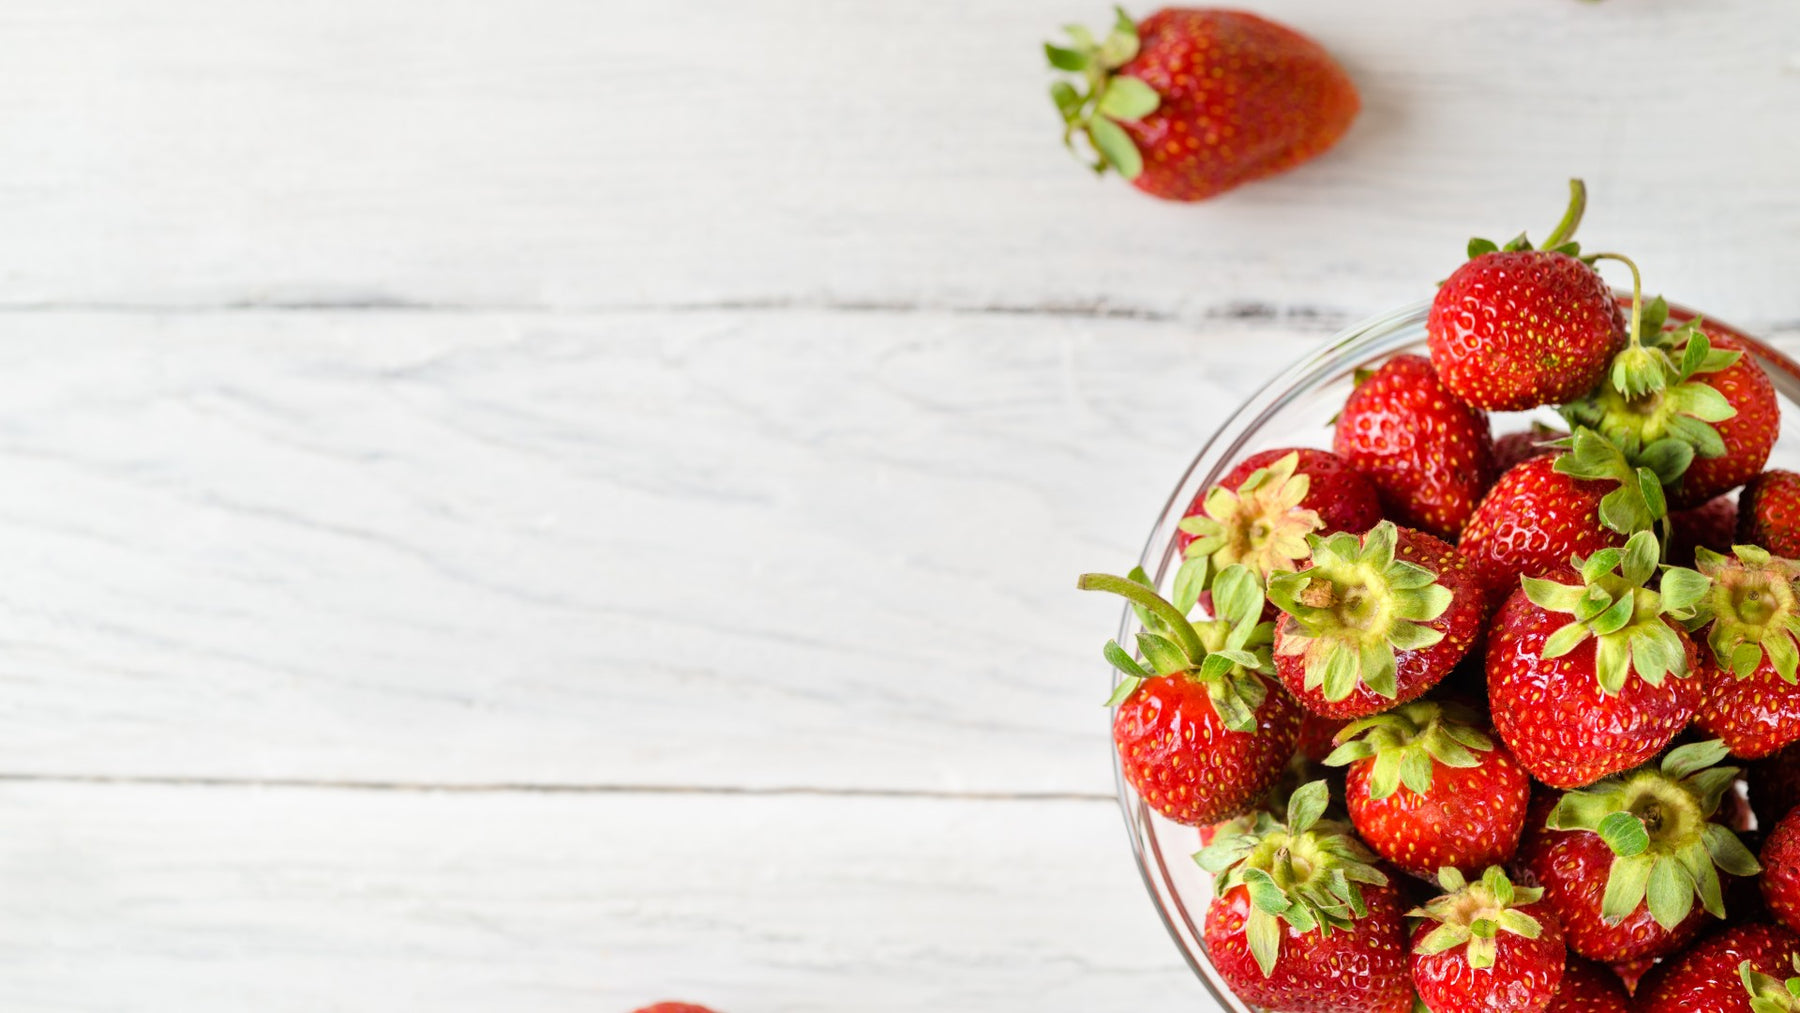 How Many Calories in Strawberries?